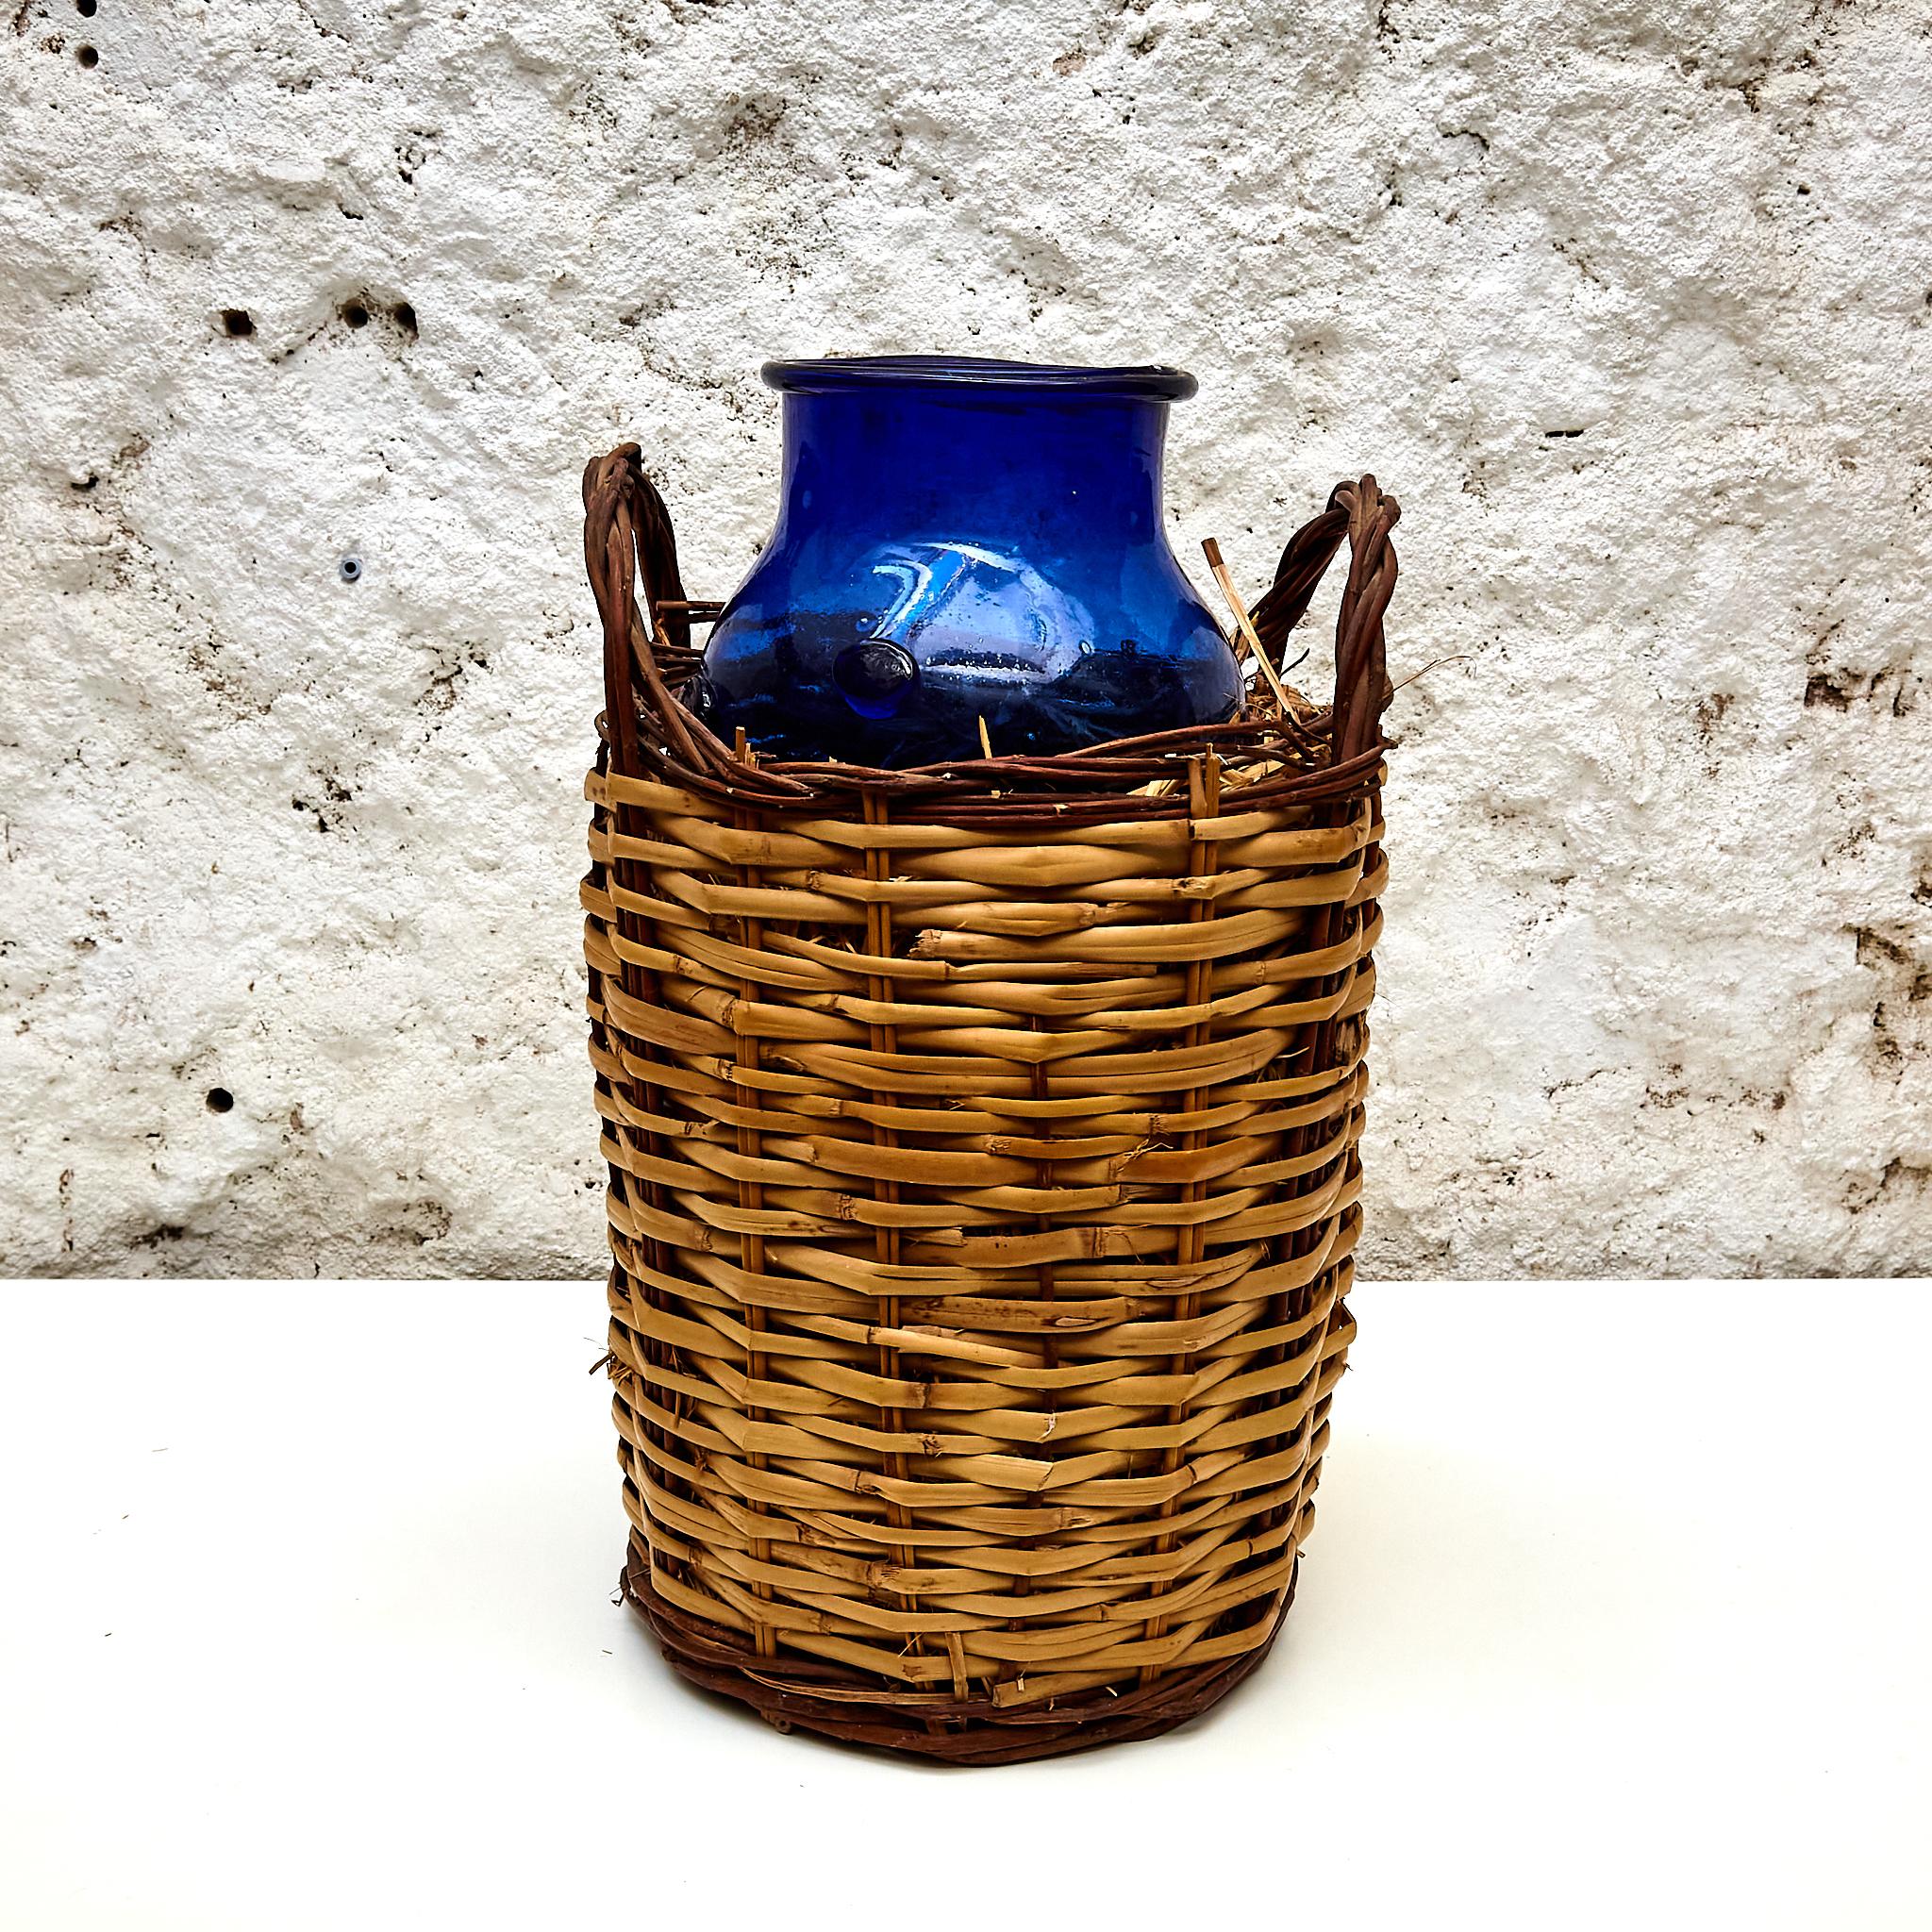 Blue glass bottle with wicker basket.

Manufactured in France, circa 1930.

In original condition with minor wear consistent of age and use, preserving a beautiful patina.

Materials: 
Glass, wicker.

Dimensions: 
Basket: Diam. 24 cm x H